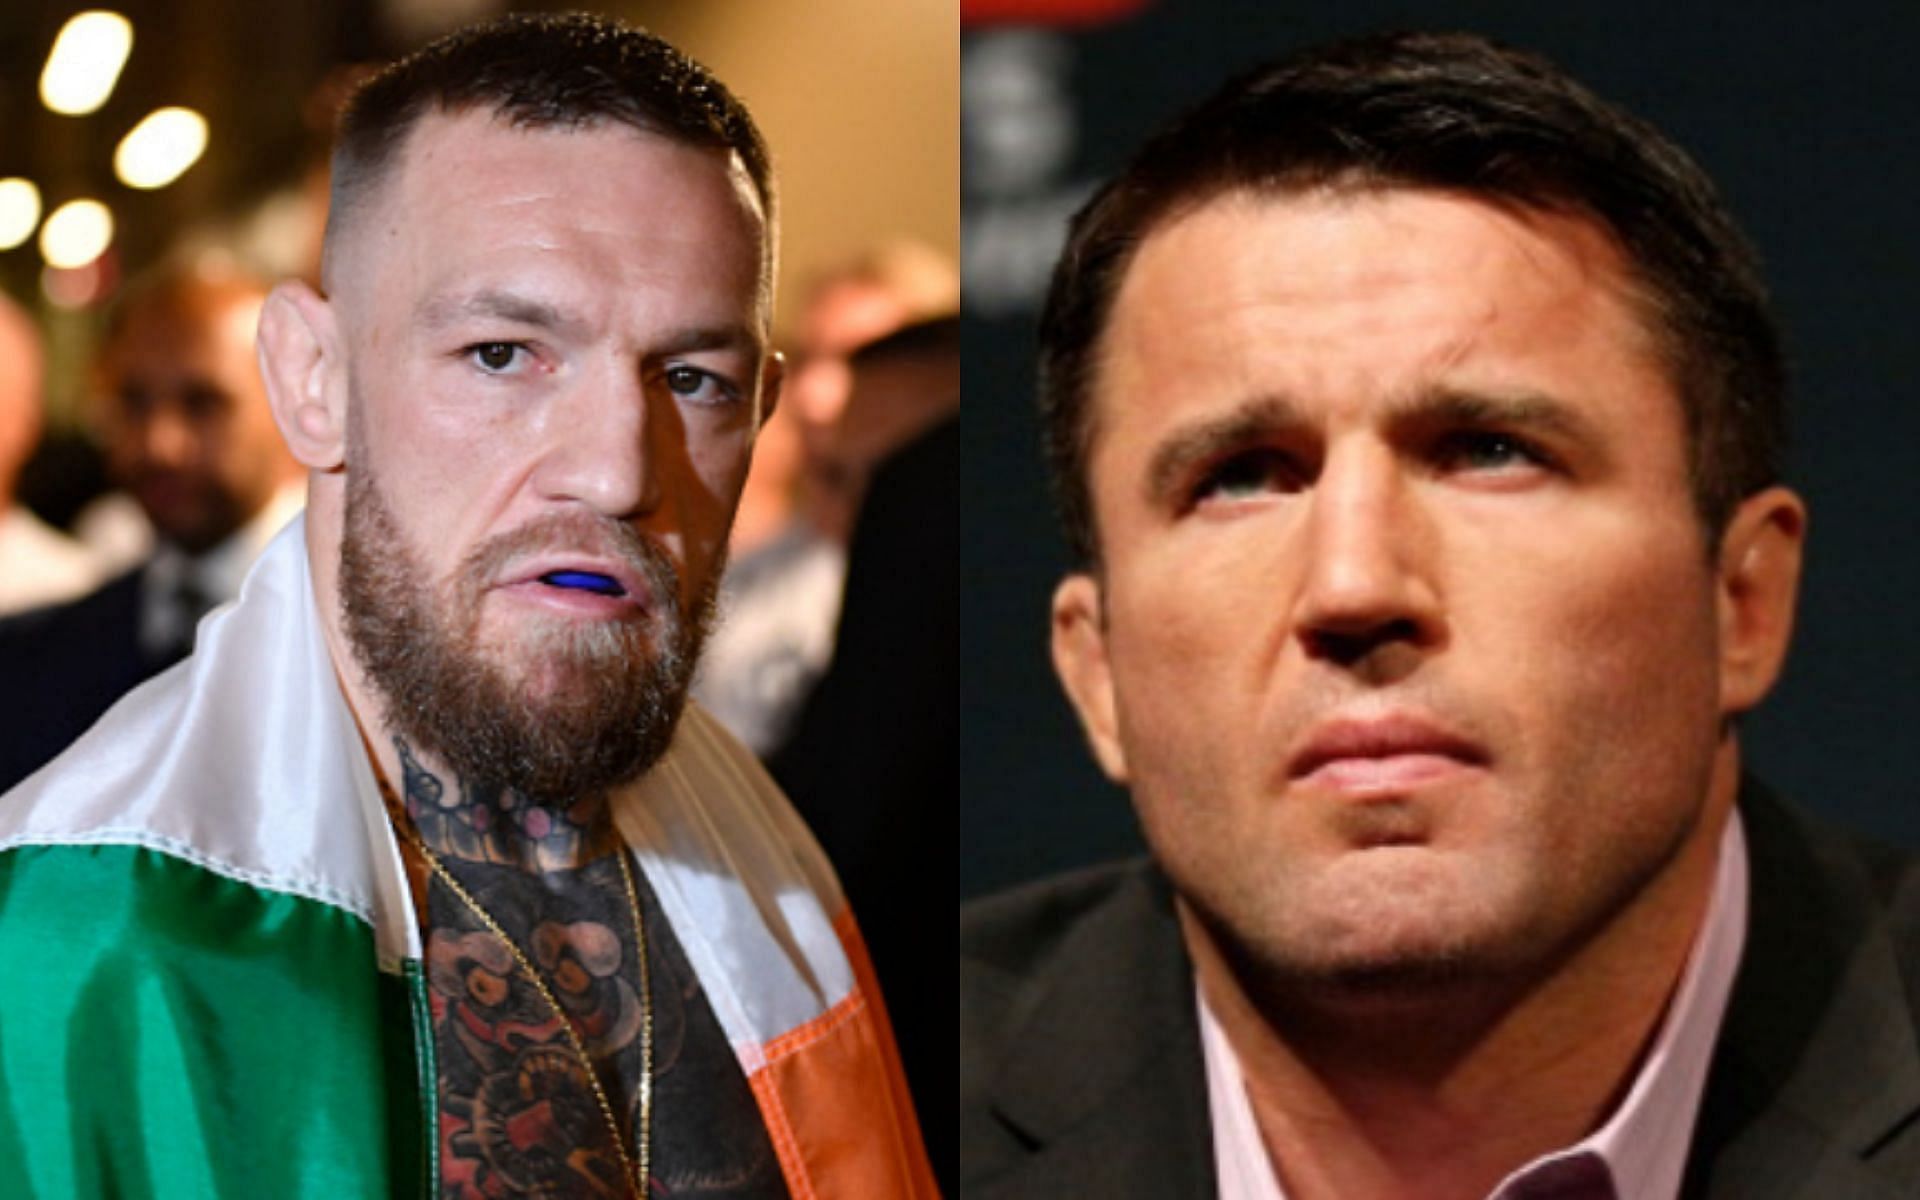 Conor McGregor (left) and Chael Sonnen (right)